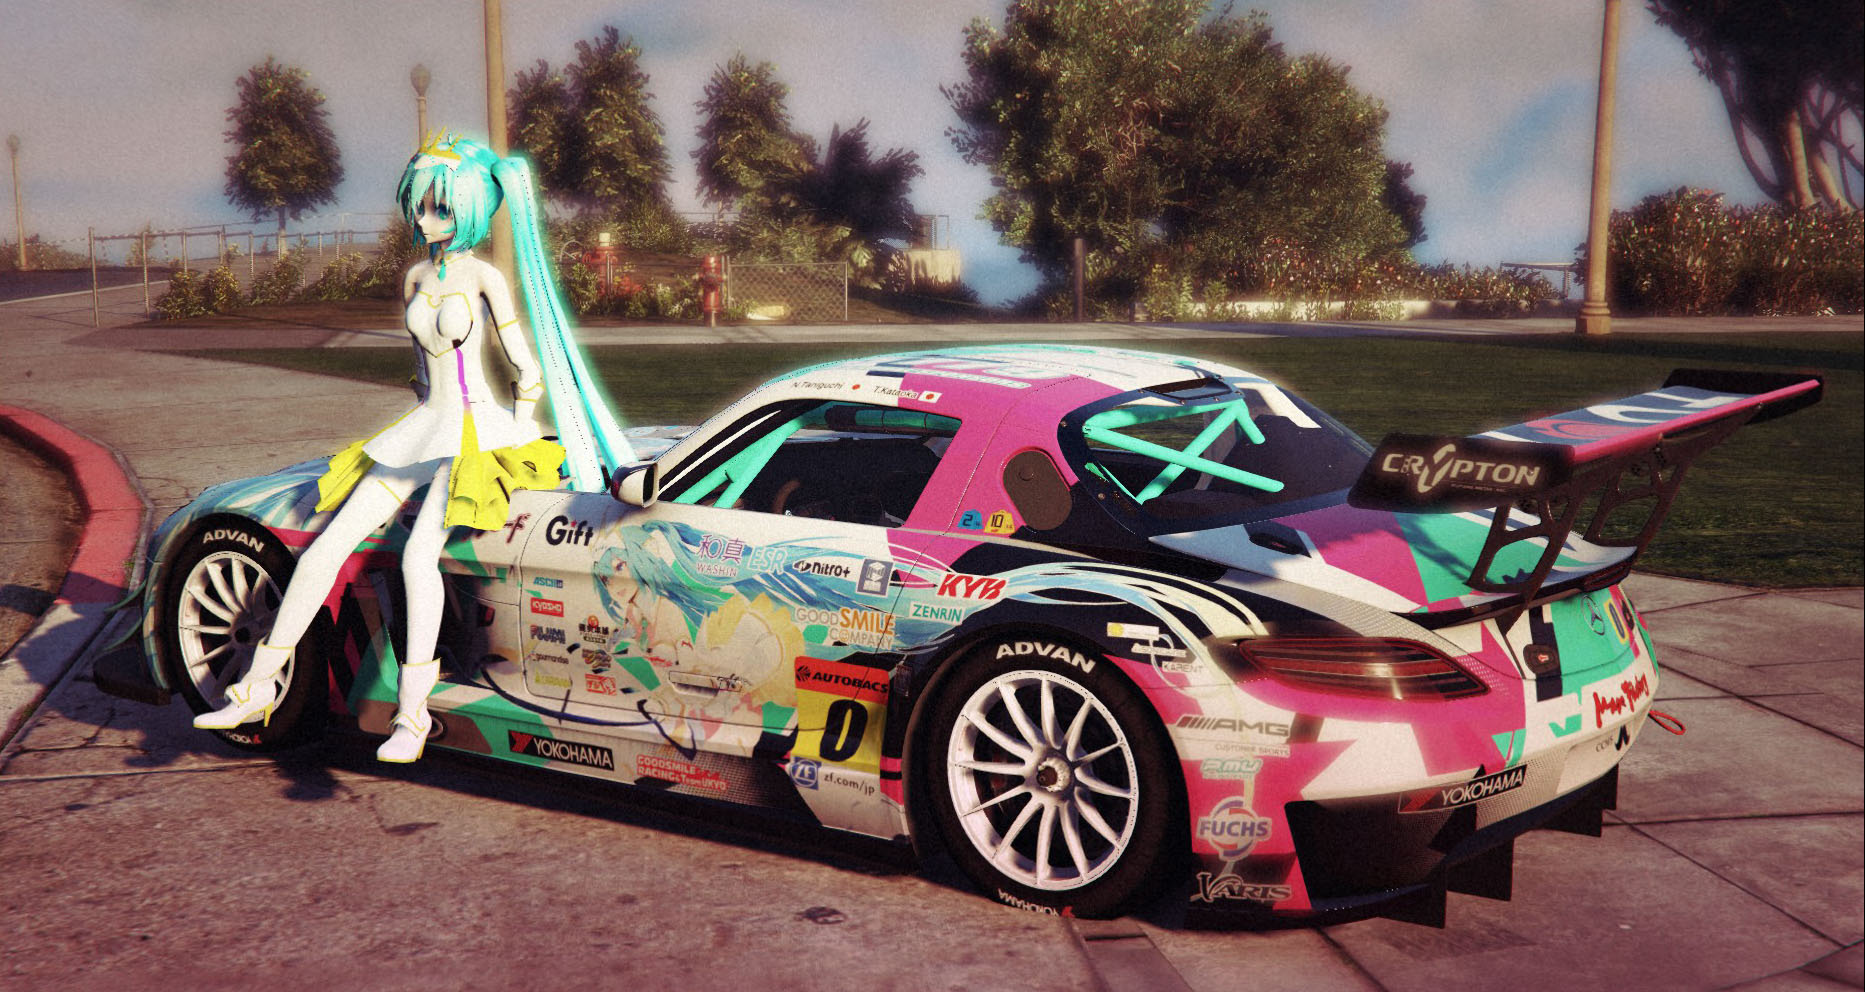 Anime Cars Gta 5 free images, download All Anime Cars Gta 5,Images Of G...